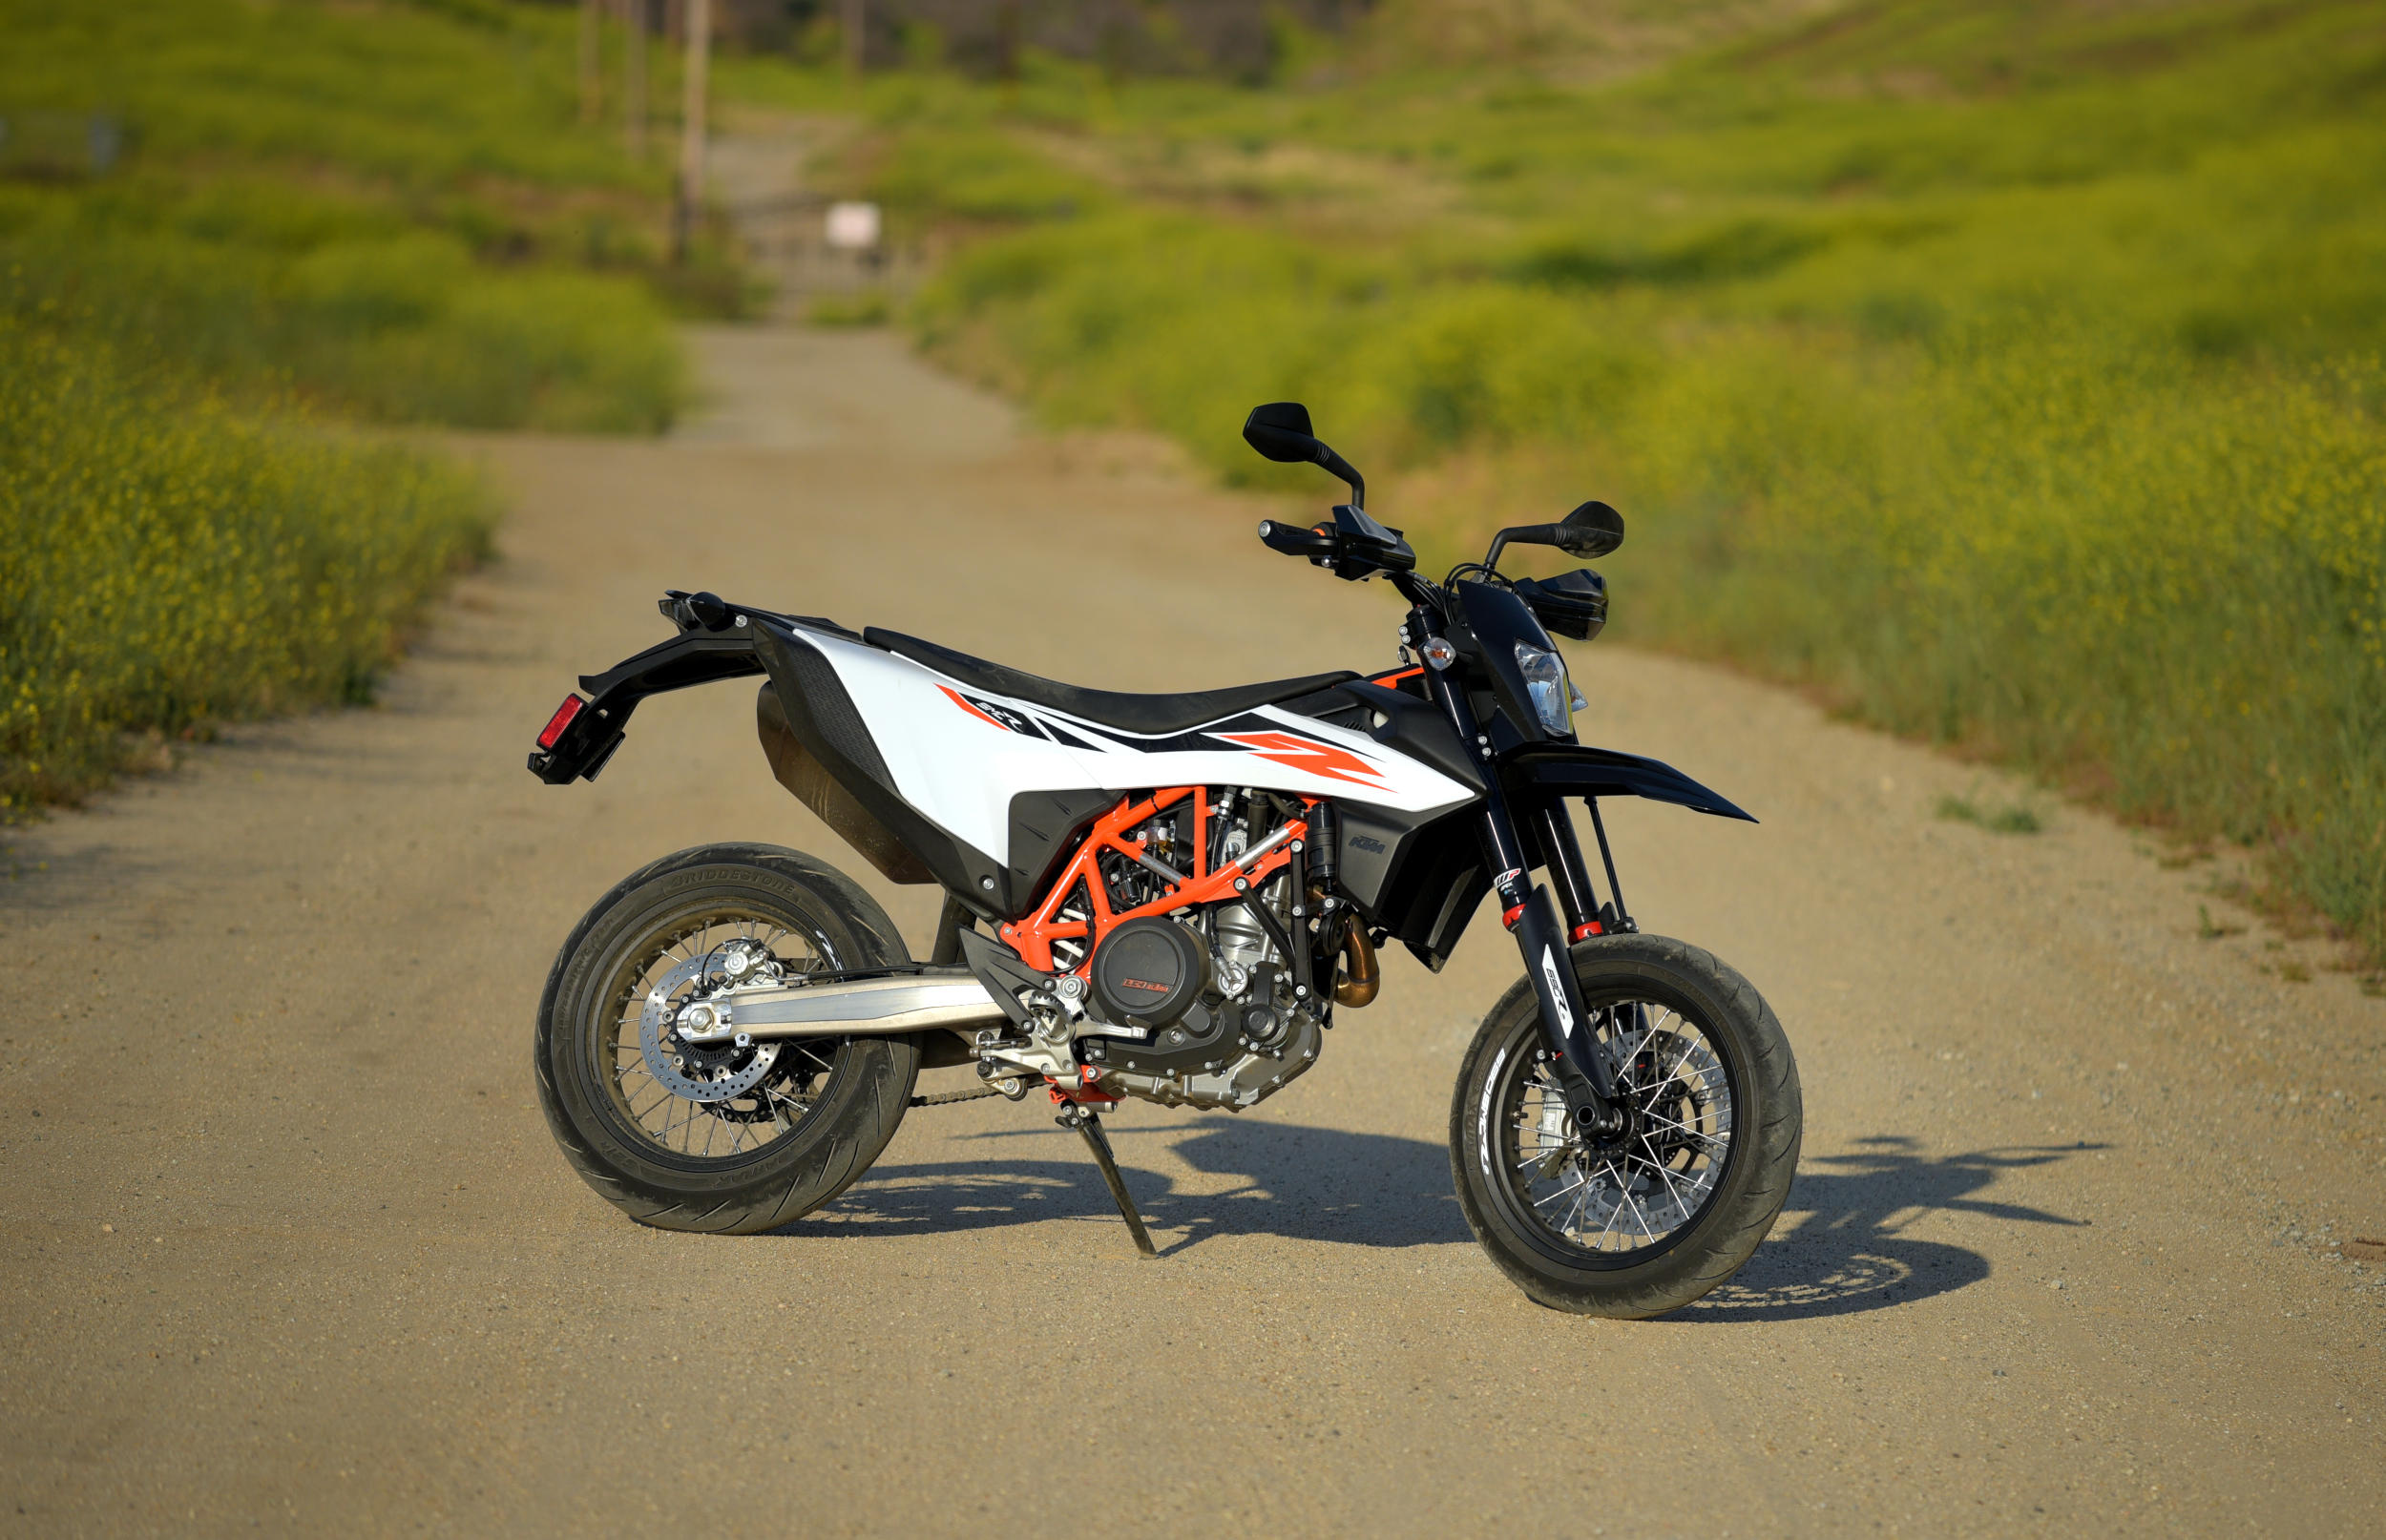 KTM 690 SMC, 2019 model, Ride review and product insights, 2500x1620 HD Desktop